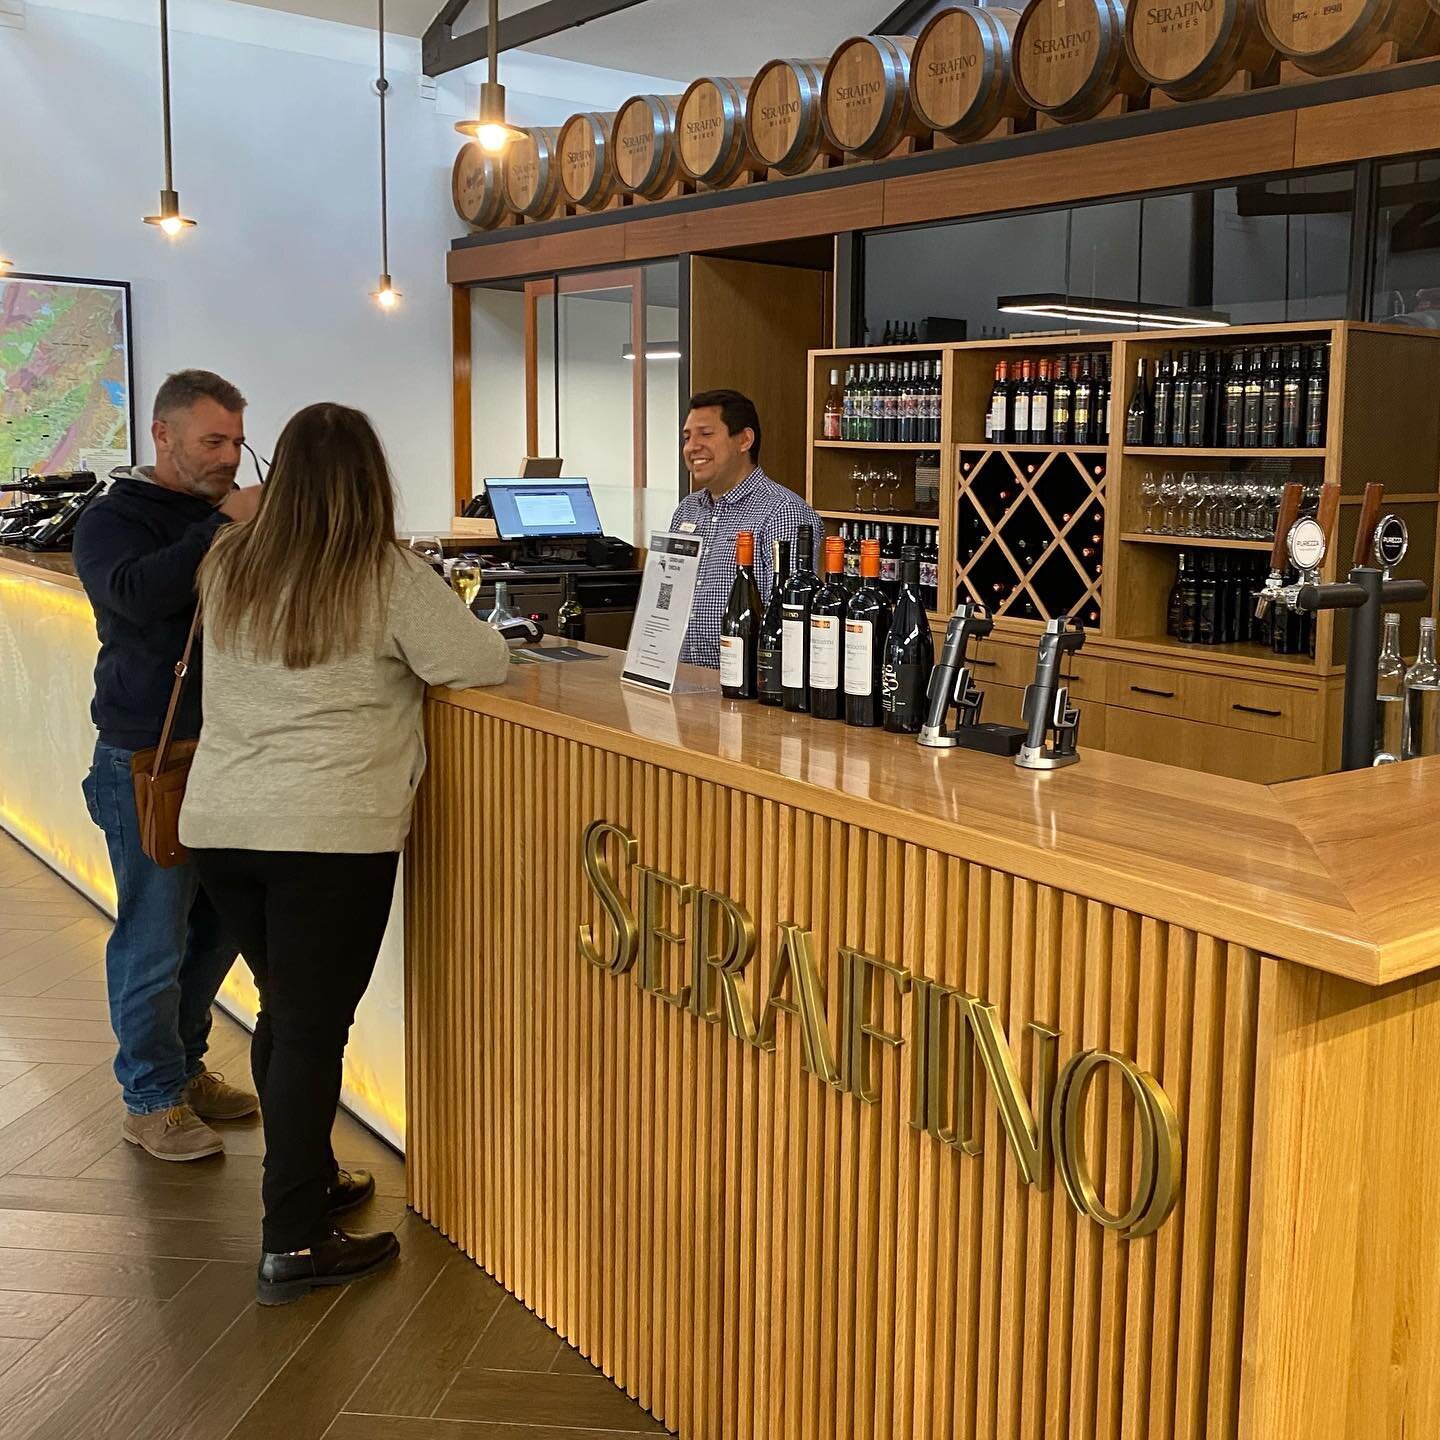 What a way to spend a Saturday afternoon, on the deck of Serafino Wines, made to feel so special by attentive staff while we enjoyed award winning wines, platters and a magnificent view.

We came not only to collect the sponsored wine for the opening